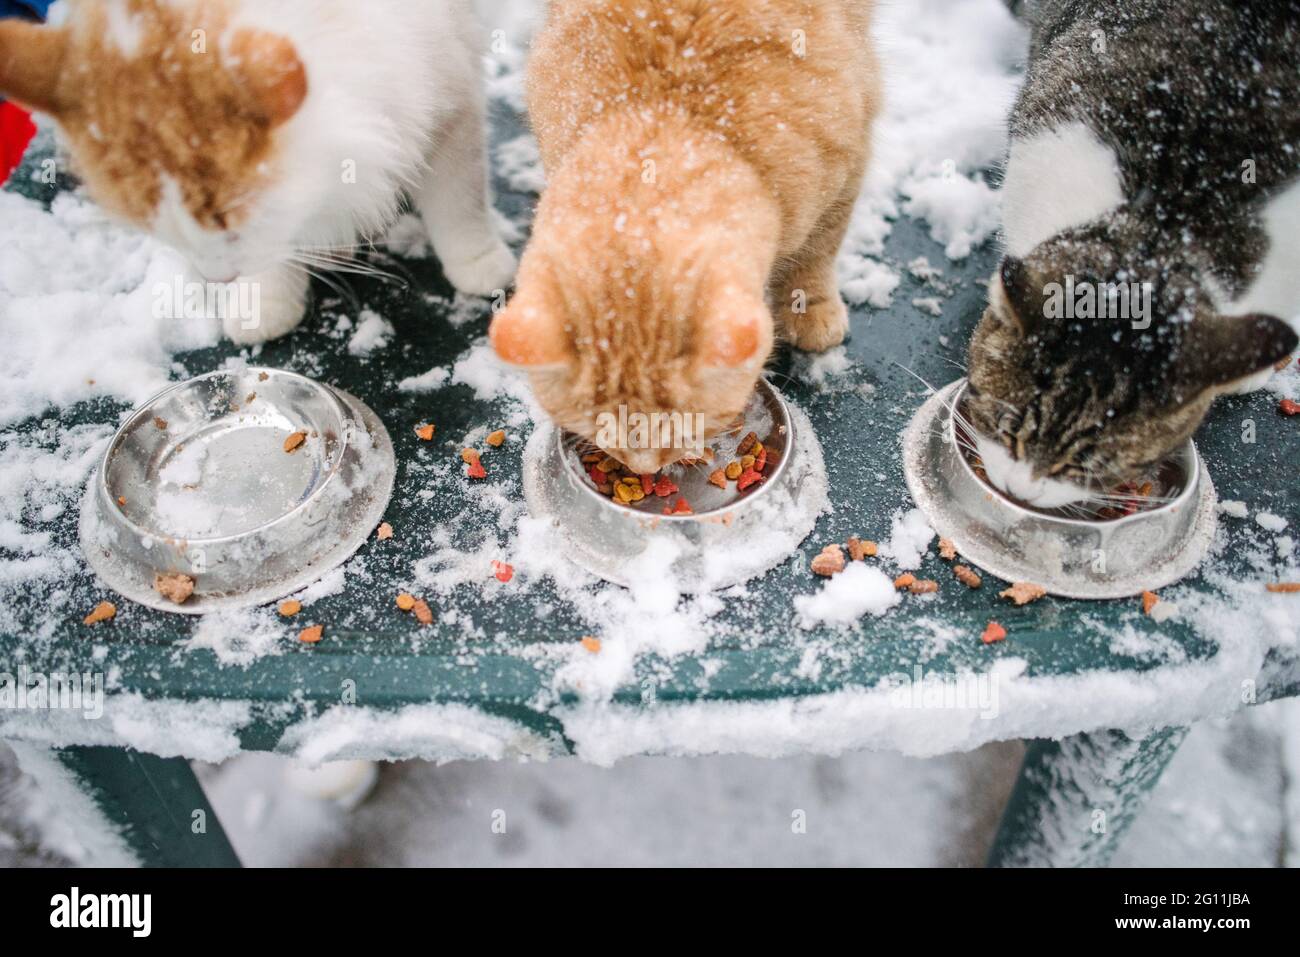 Canada, Ontario, Three cats eating from bowls in snow Stock Photo